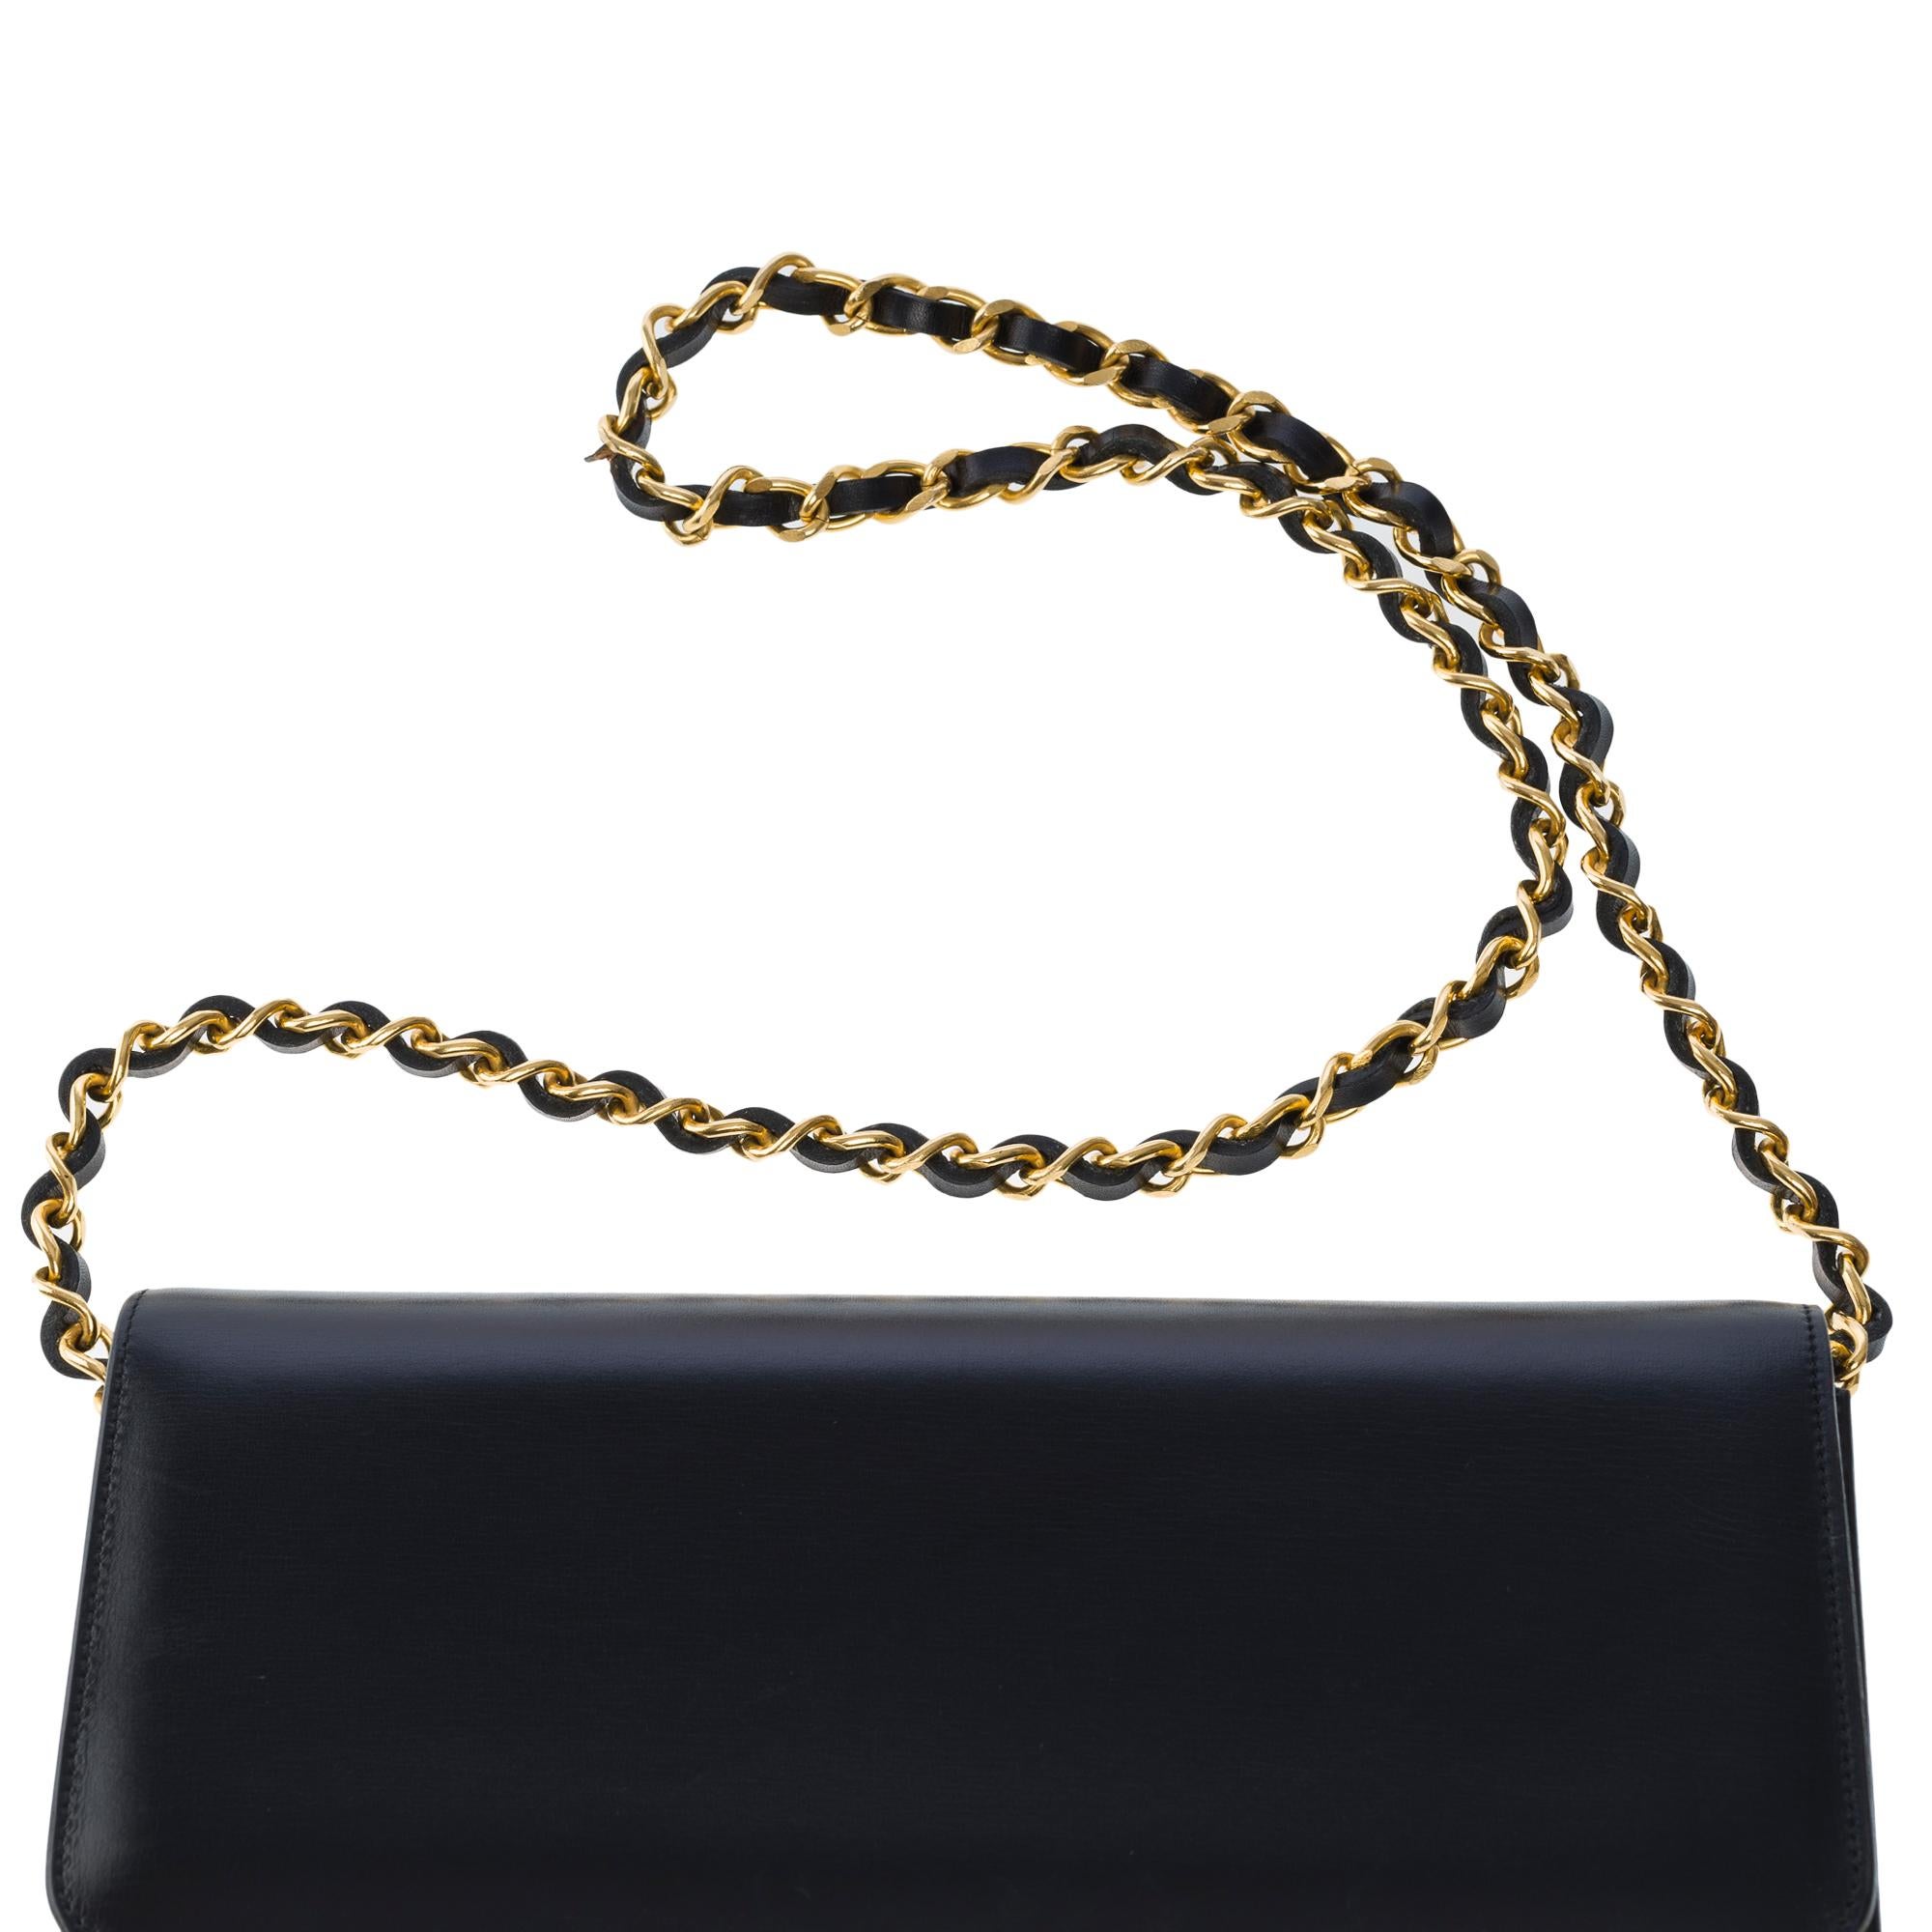 Gorgeous Chanel Classic shoulder flap bag in black box calfskin leather, GHW 14